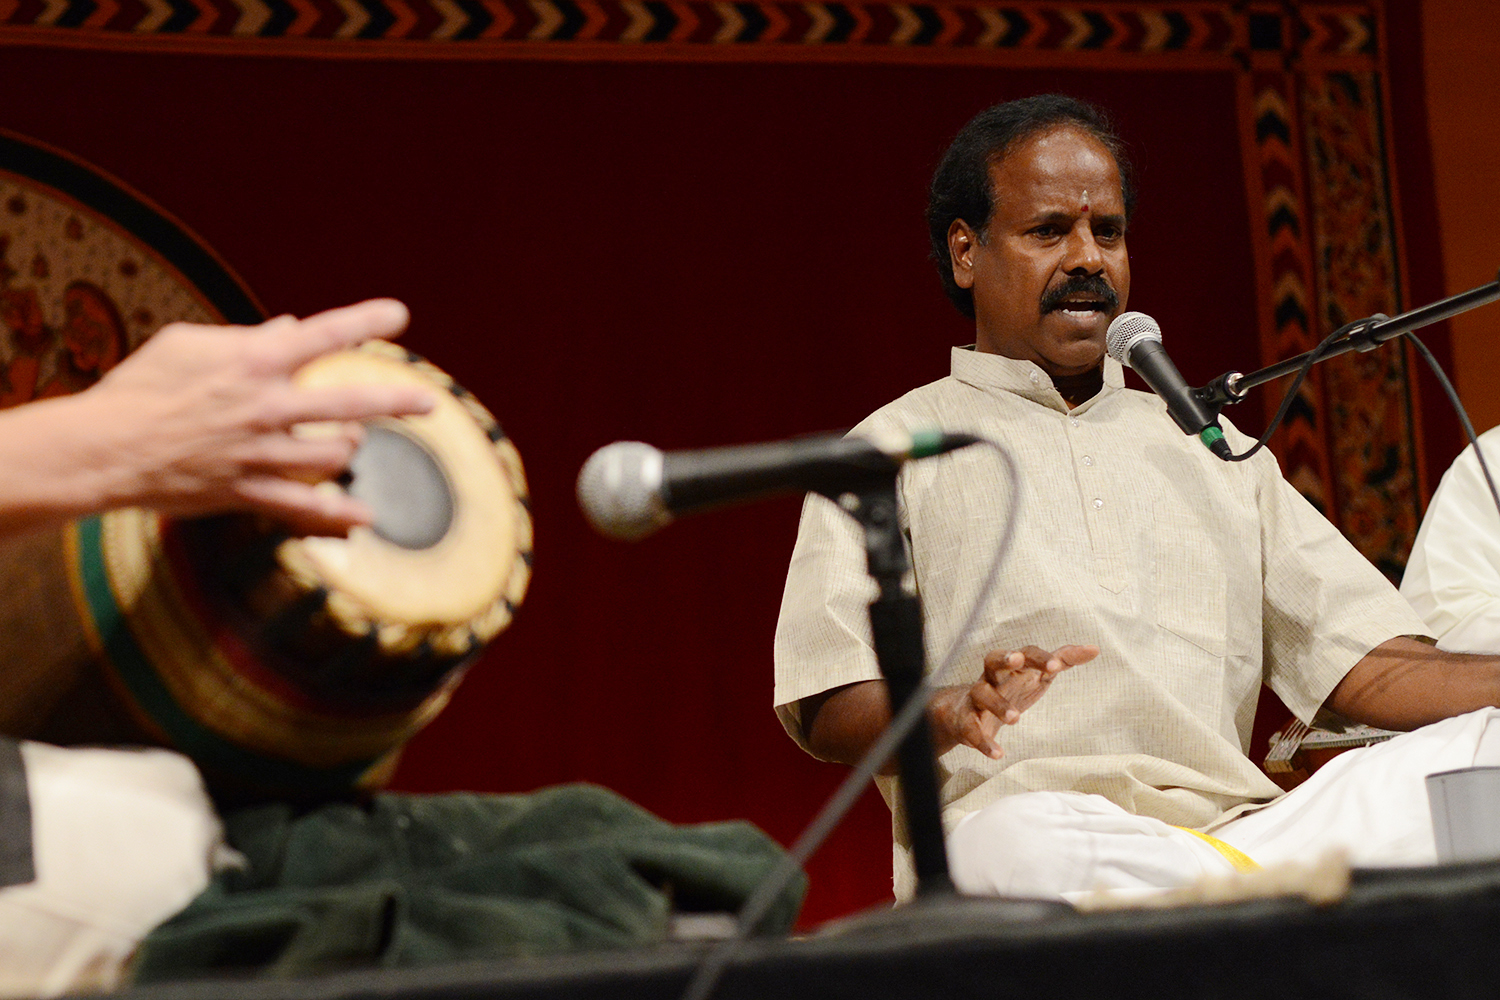 Adjunct Assistant Professor of Music B. Balasubrahmaniyan "Balu" is is a vocalist who has performed in India and abroad since 1985.